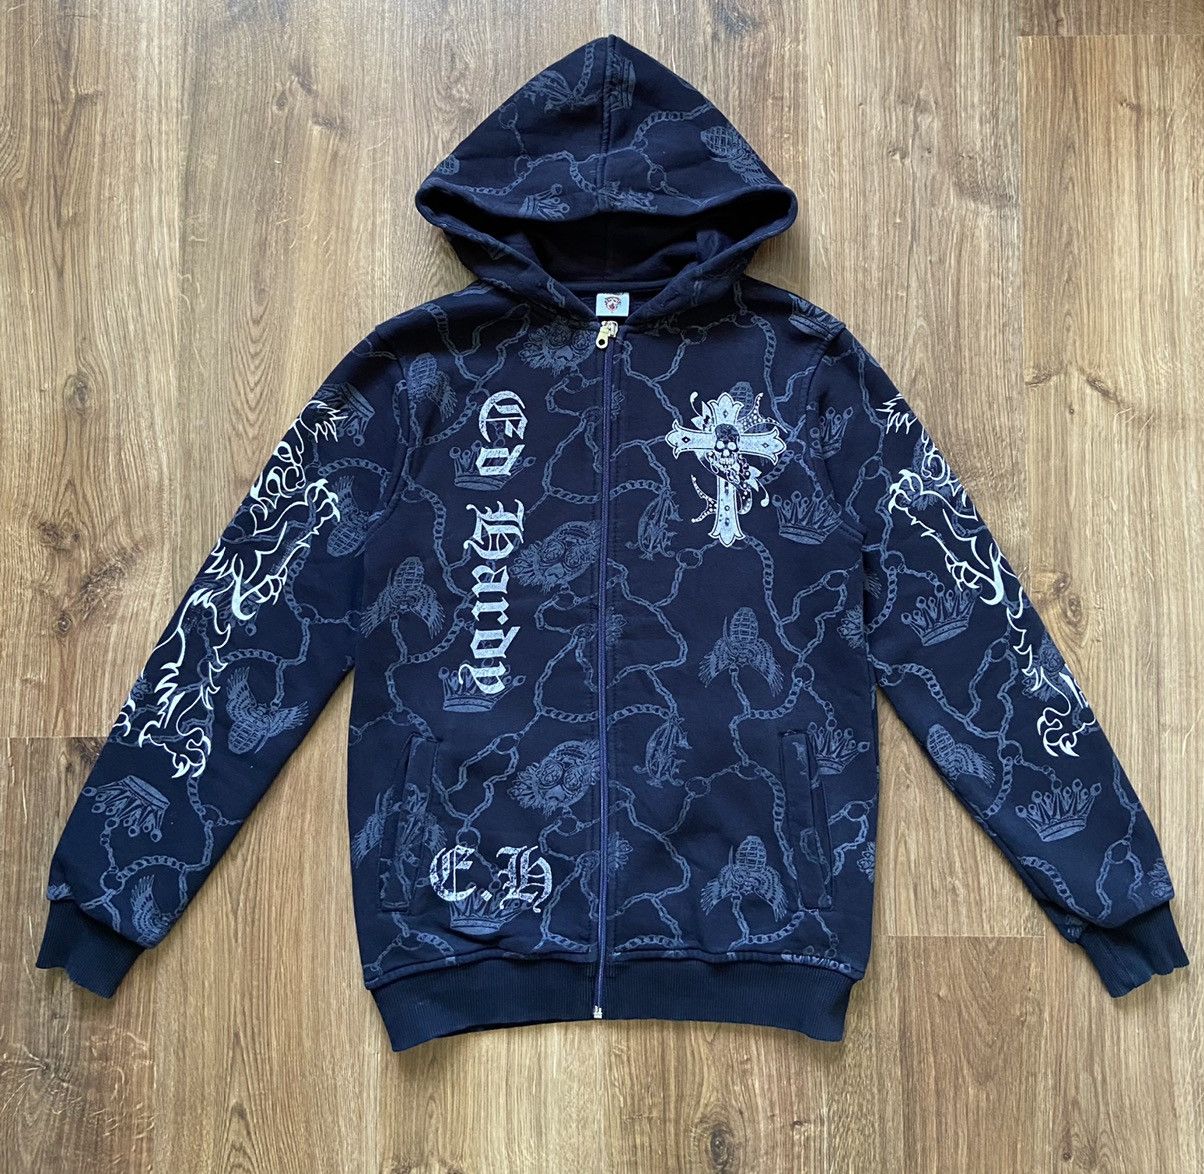 Vintage ed hardy zip up hoodie Size US S / EU 44-46 / 1 - 2 Preview